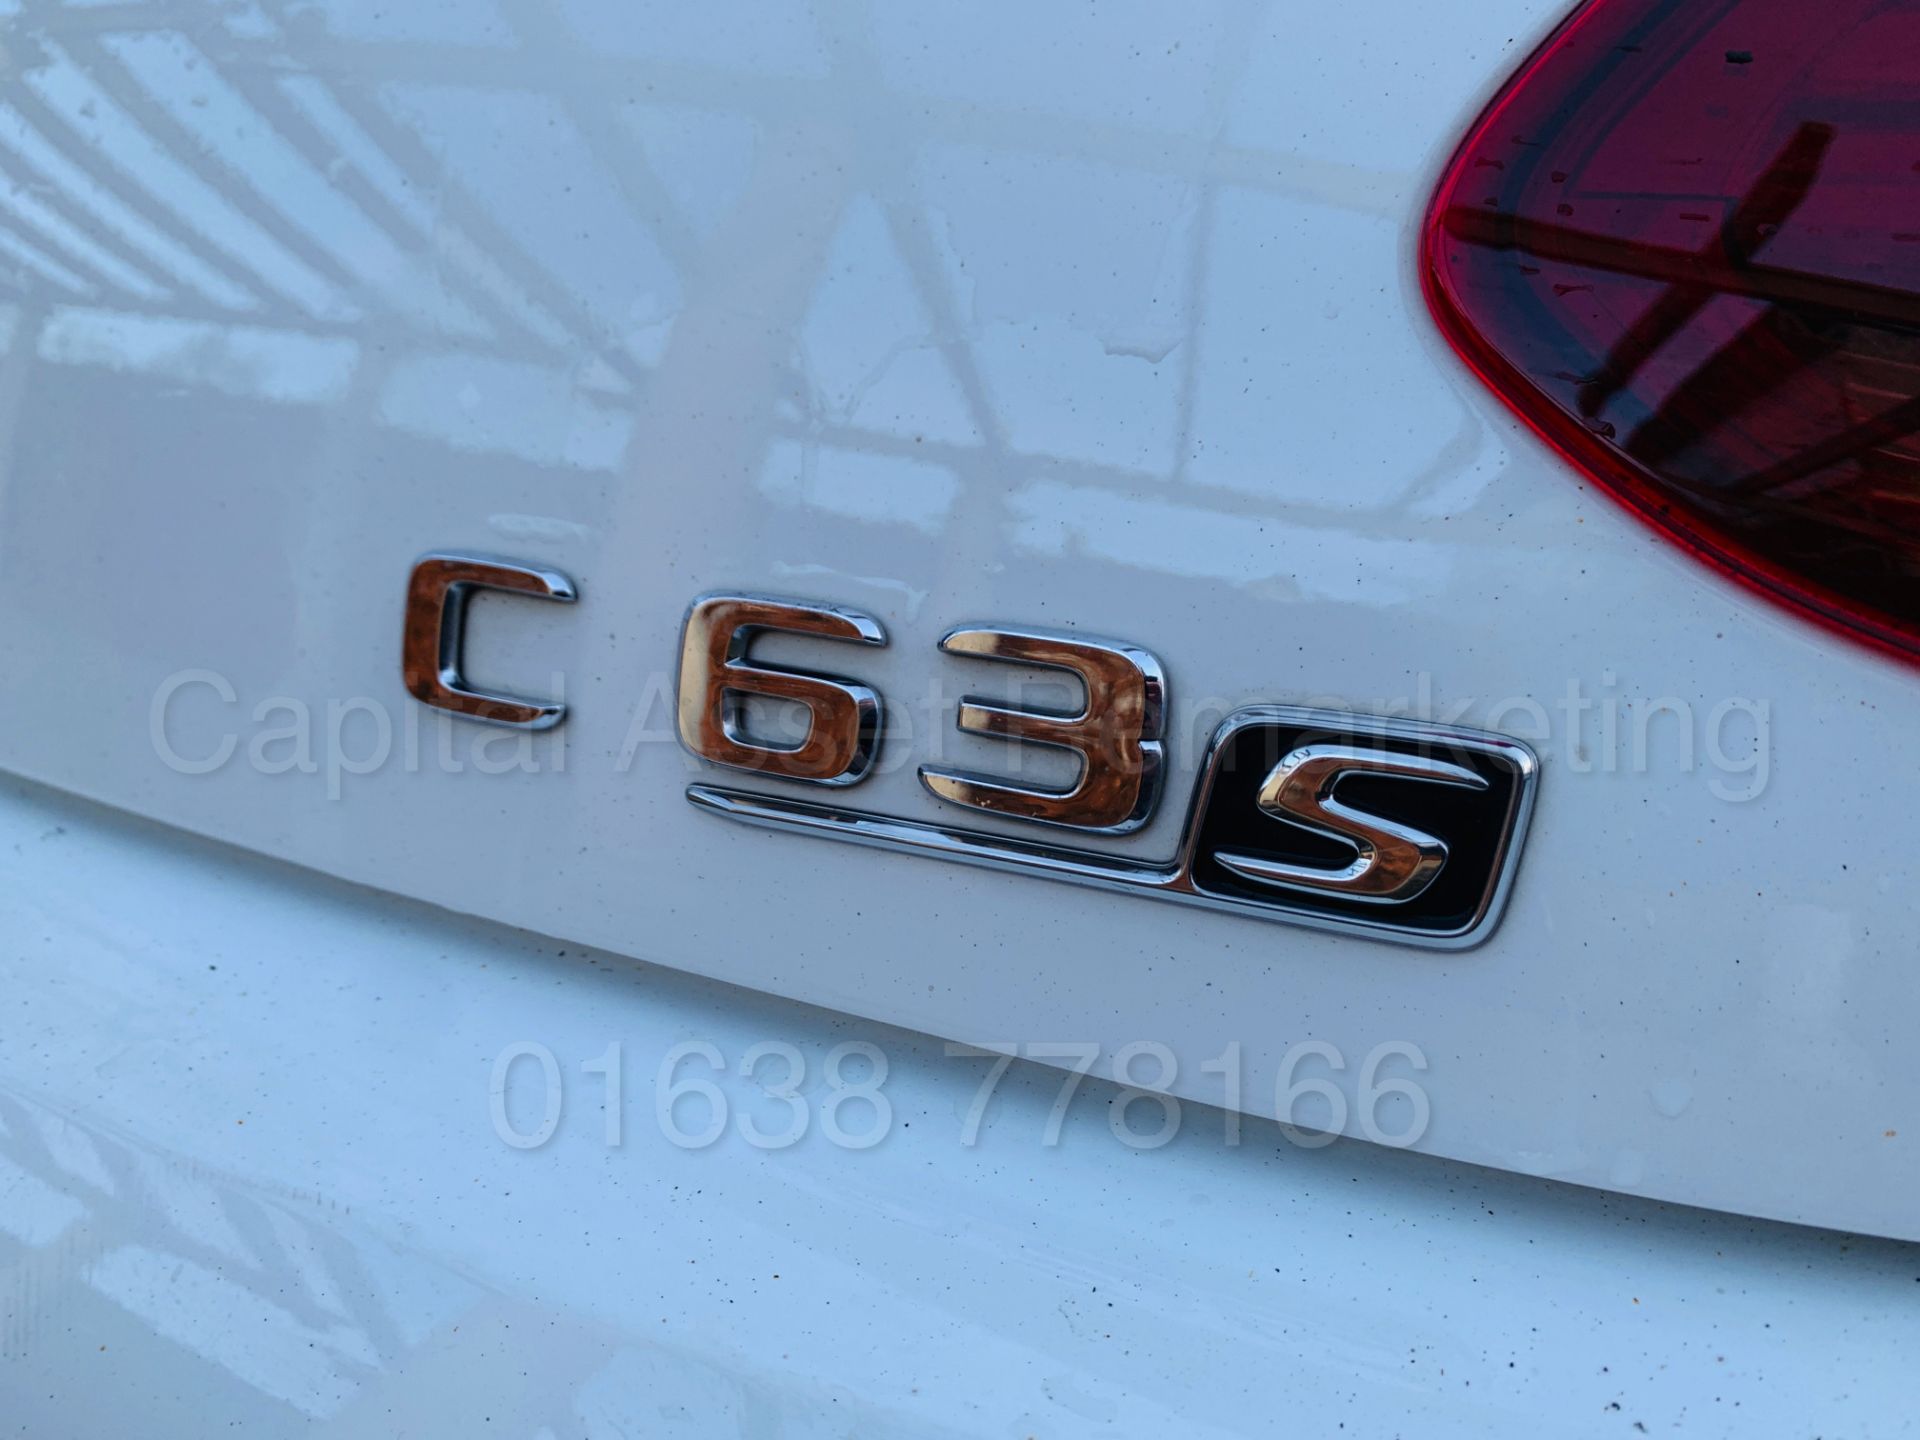 (On Sale) MERCEDES-BENZ AMG C63-S *CABRIOLET* (67 REG) '4.0 BI-TURBO -510 BHP - AUTO' *FULLY LOADED* - Image 34 of 79